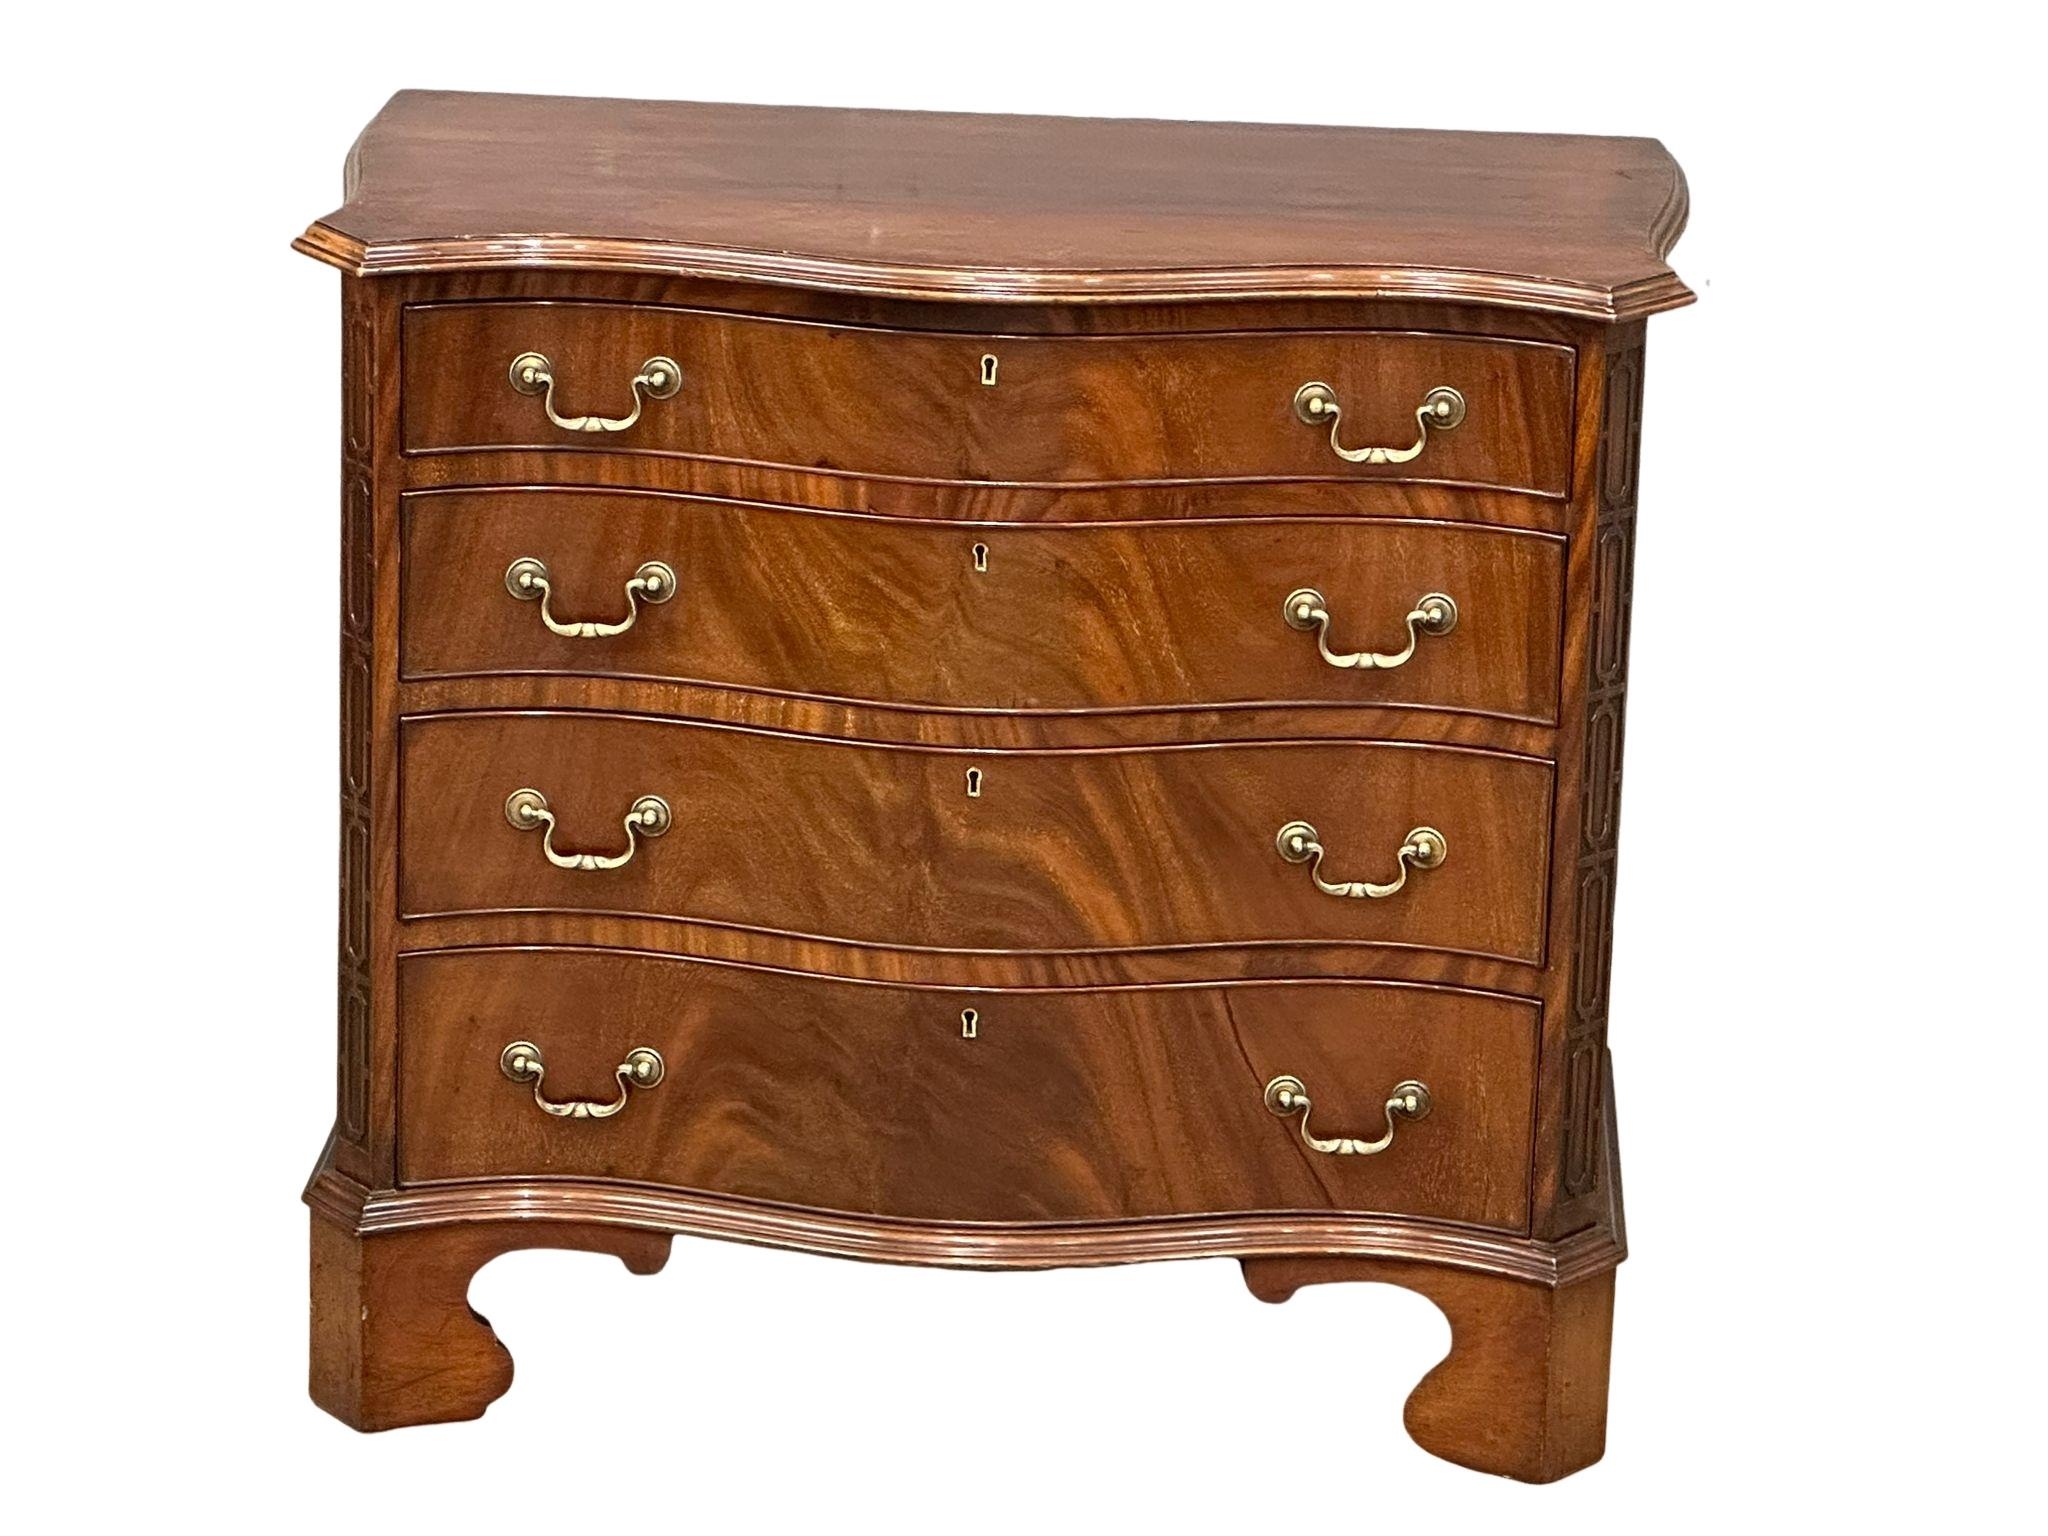 A good quality late 19th century Chippendale Revival mahogany serpentine front chest of drawers. - Image 22 of 22